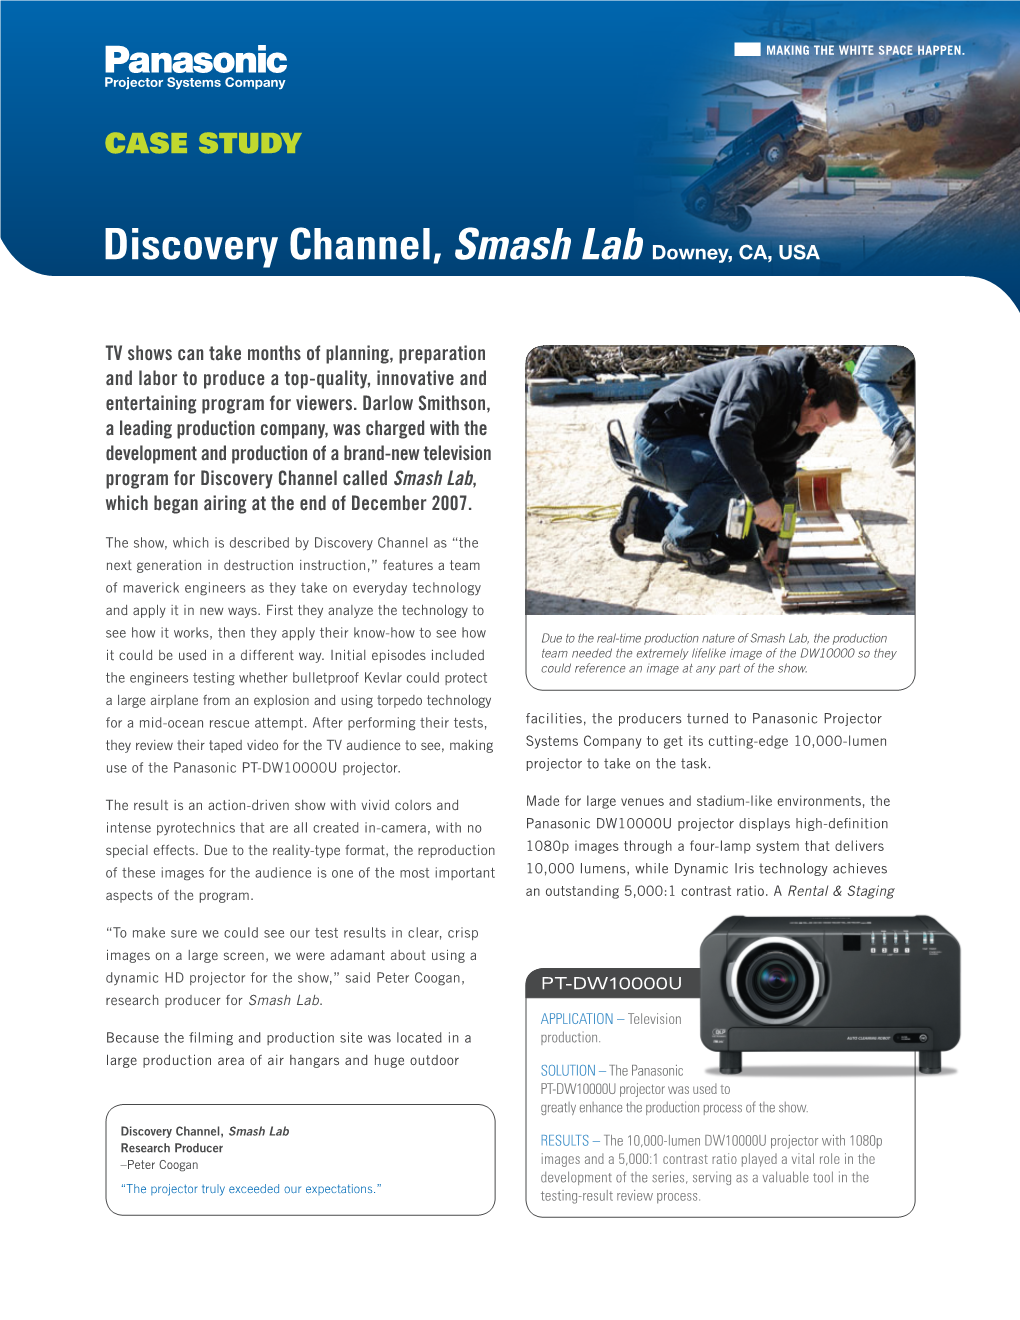 Discovery Channel, Smash Lab Downey, CA, USA